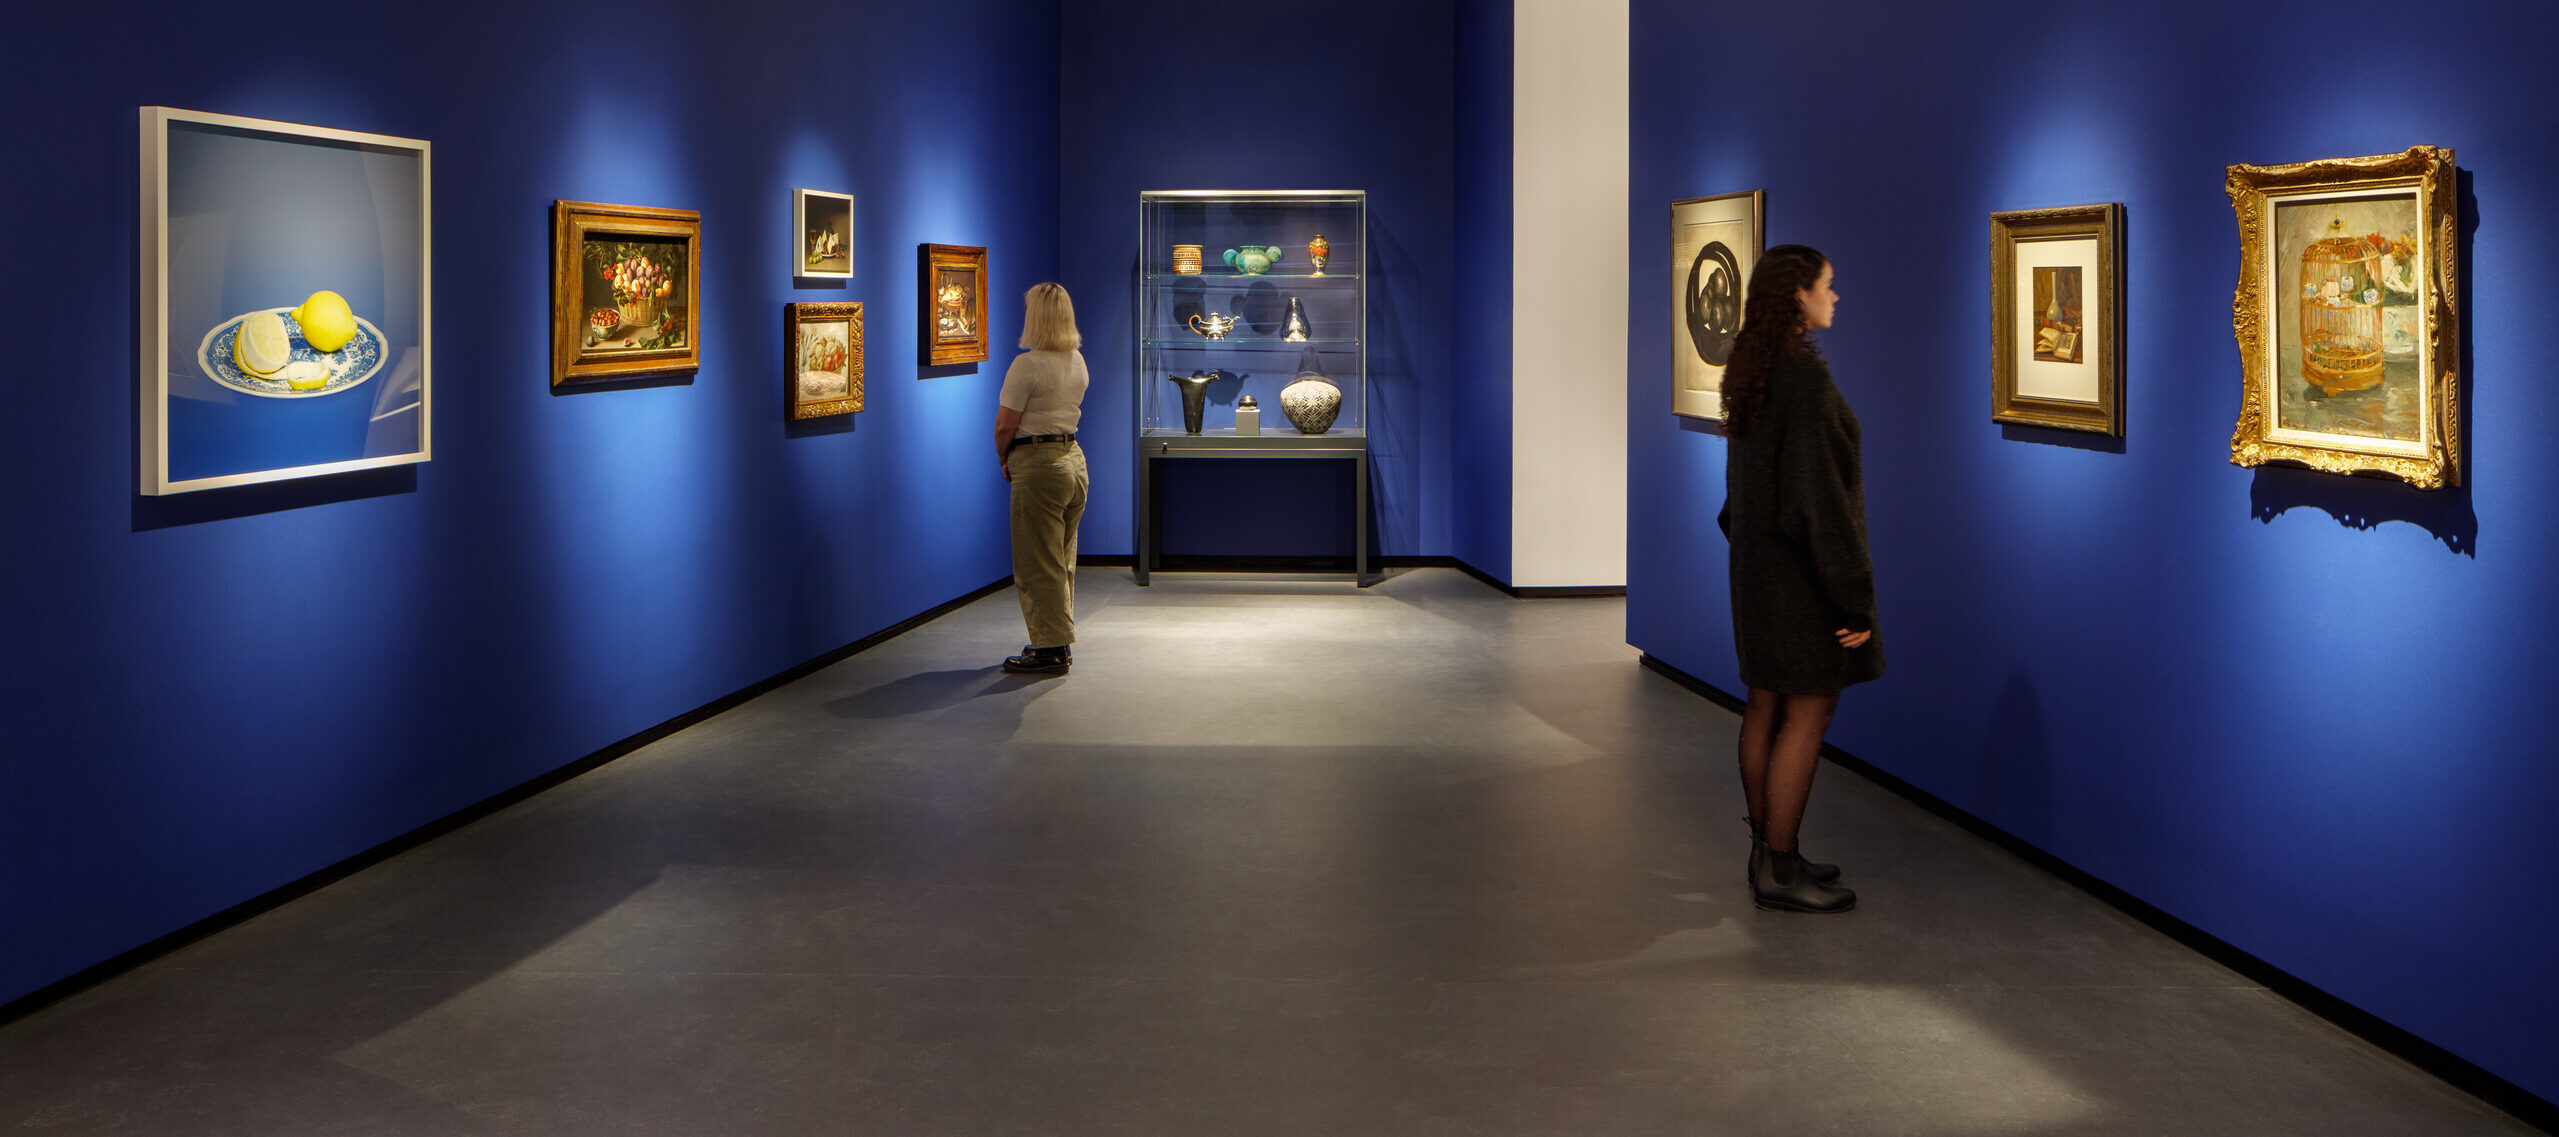 Museum visitors observe artworks hanging on the royal blue walls of a small gallery bay. Paintings of various sizes are on display, and small sculptures are in a glass case.